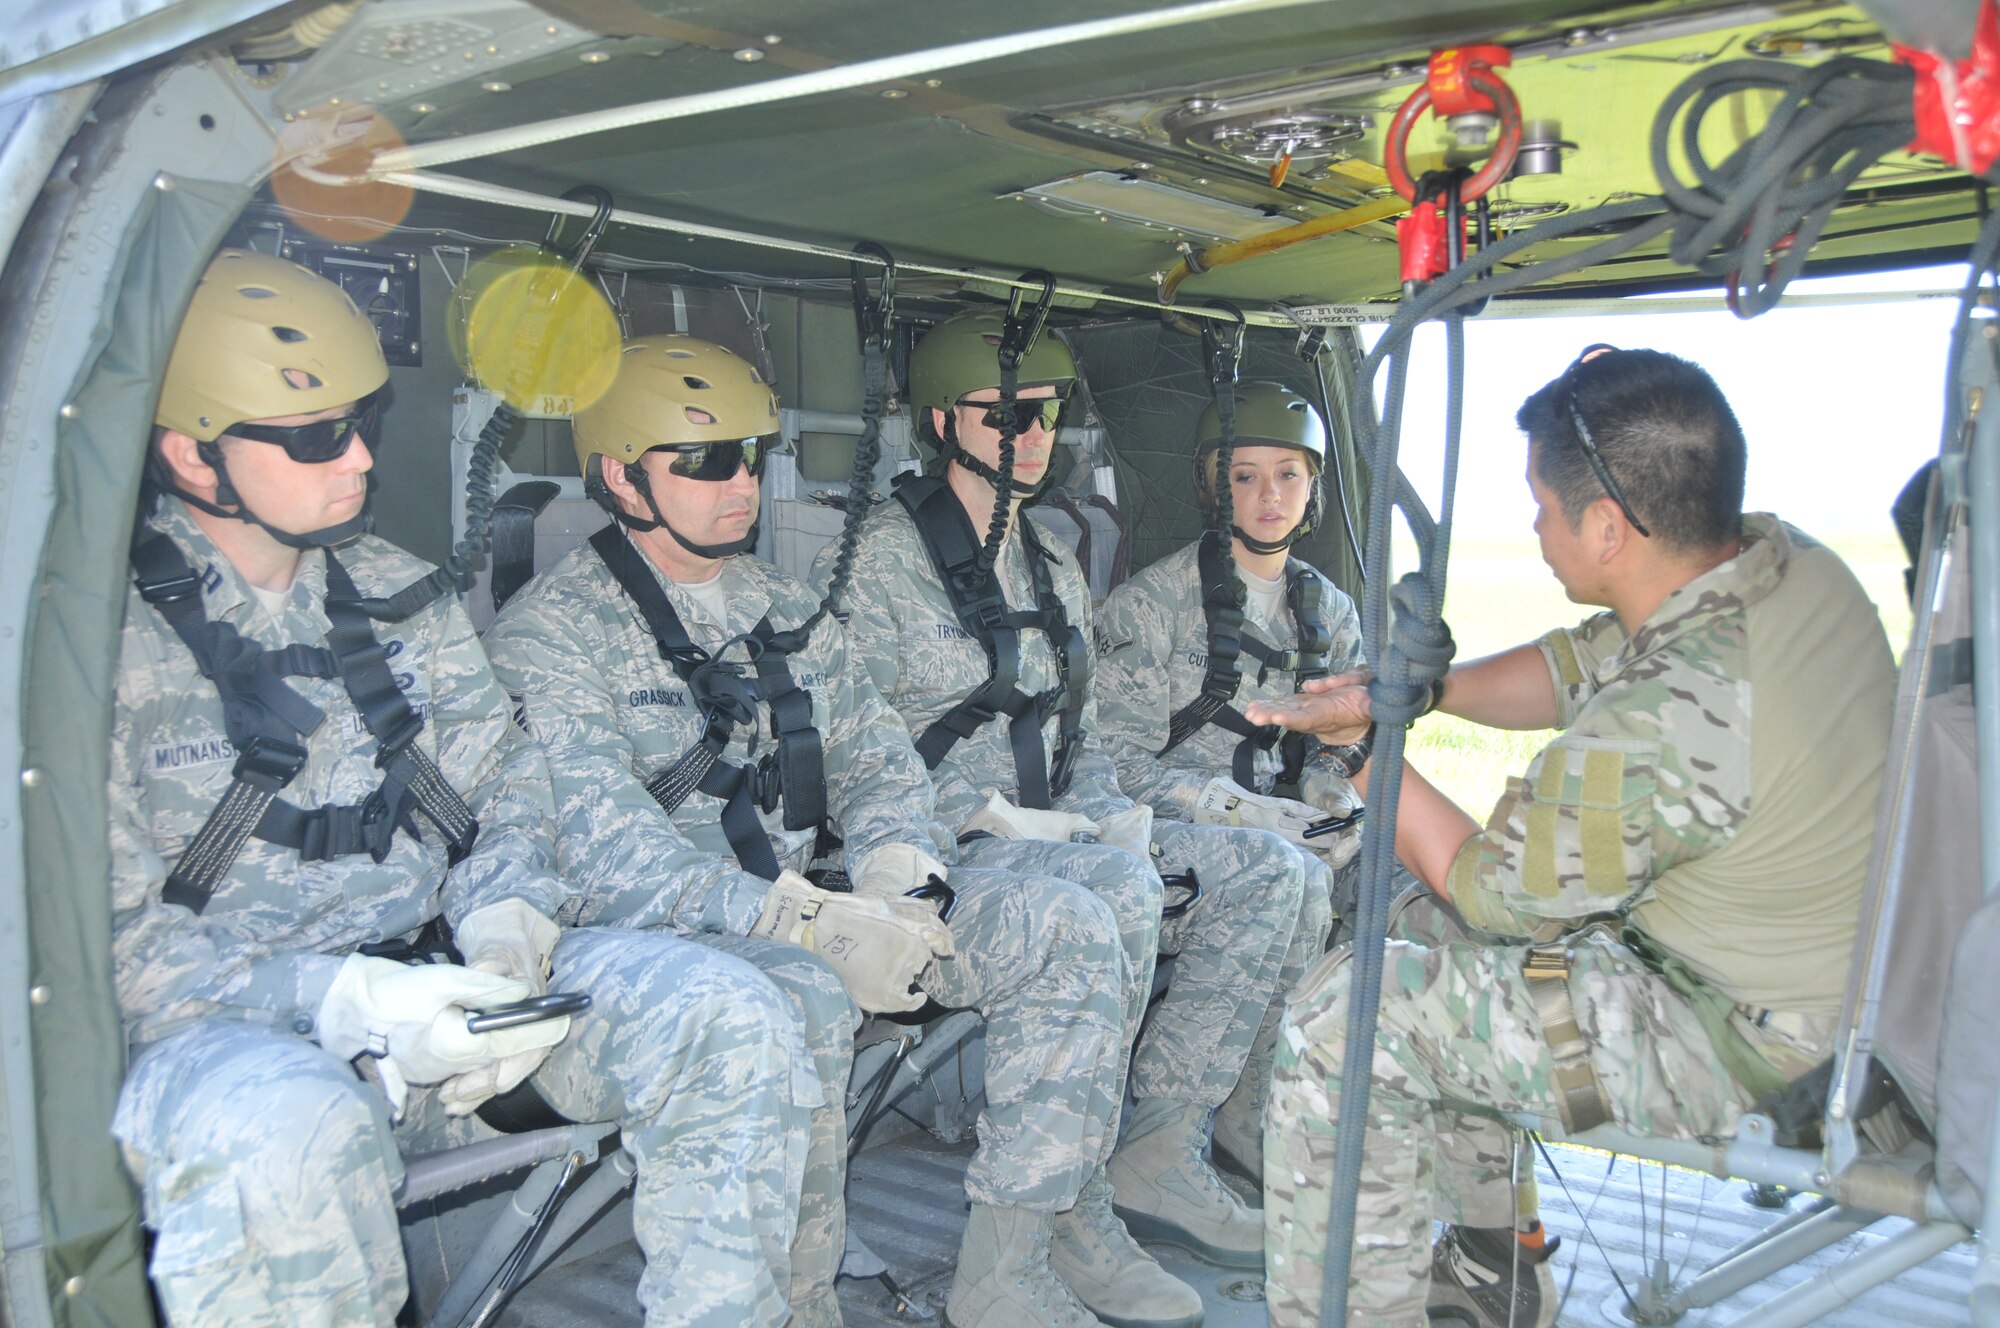 U.S. Air Force members from the 181st Intelligence Wing, Security Forces Squadron, (LtoR): Capt. John F. Mutnansky; Master Sgt. Donald L. Grassick; Tech. Sgt. Richard J. Tryon and Airmen 1st Class Candace M. Cutler, get their final brief before they attempt the 80 foot elevator lift on board a UH60 Blackhawk helicopter at Camp Atterbury, Edinburgh, Ind., on May 15, 2013. Security Forces went to participate in multi-agency law enforcement training event which promotes better communications between agencies and allows for additional skill sets directly related to the Air National Guard's missions of Homeland Security and Domestic Operations.  (U.S. Air National Guard photo by Senior Master Sgt. John S. Chapman/Released)